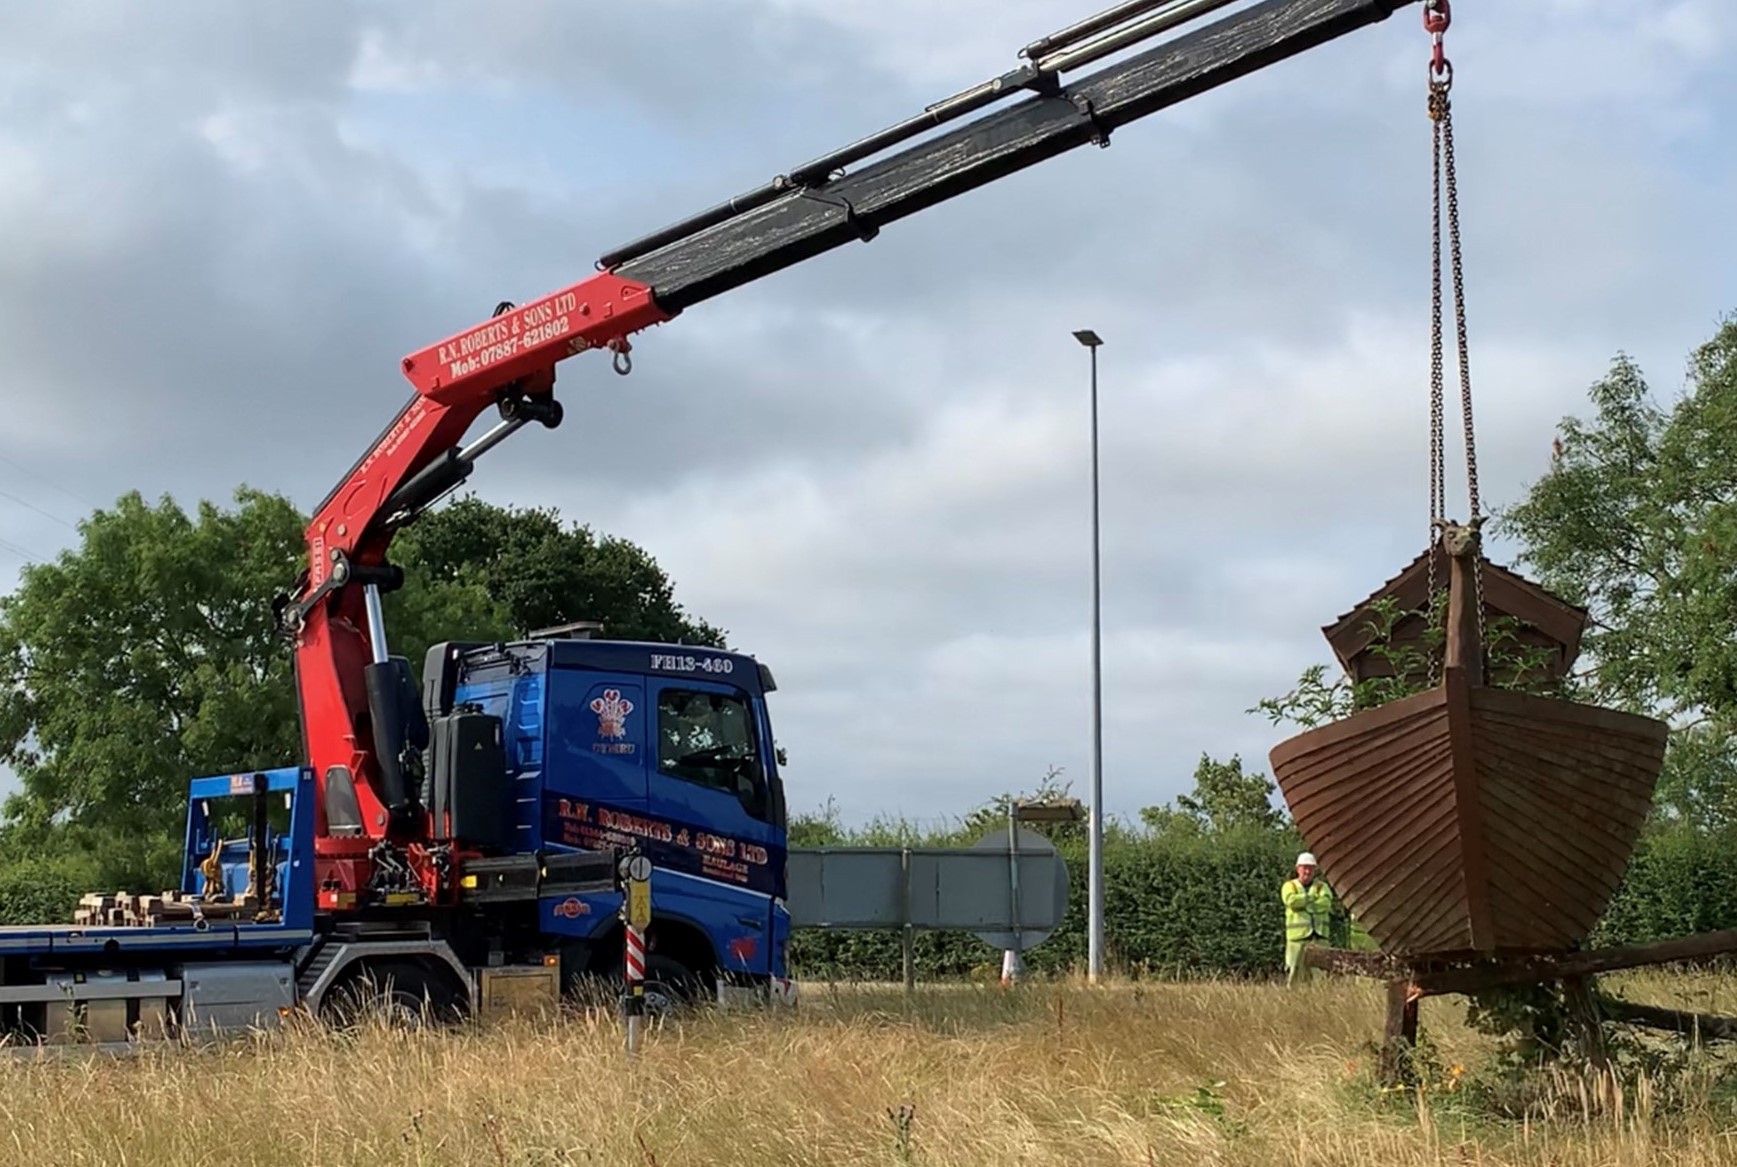 The Noahs Ark sculpture is taken away from the Chester Zoo Roundabout on Wednesday, July 20 - but will have a new lease of life after all.